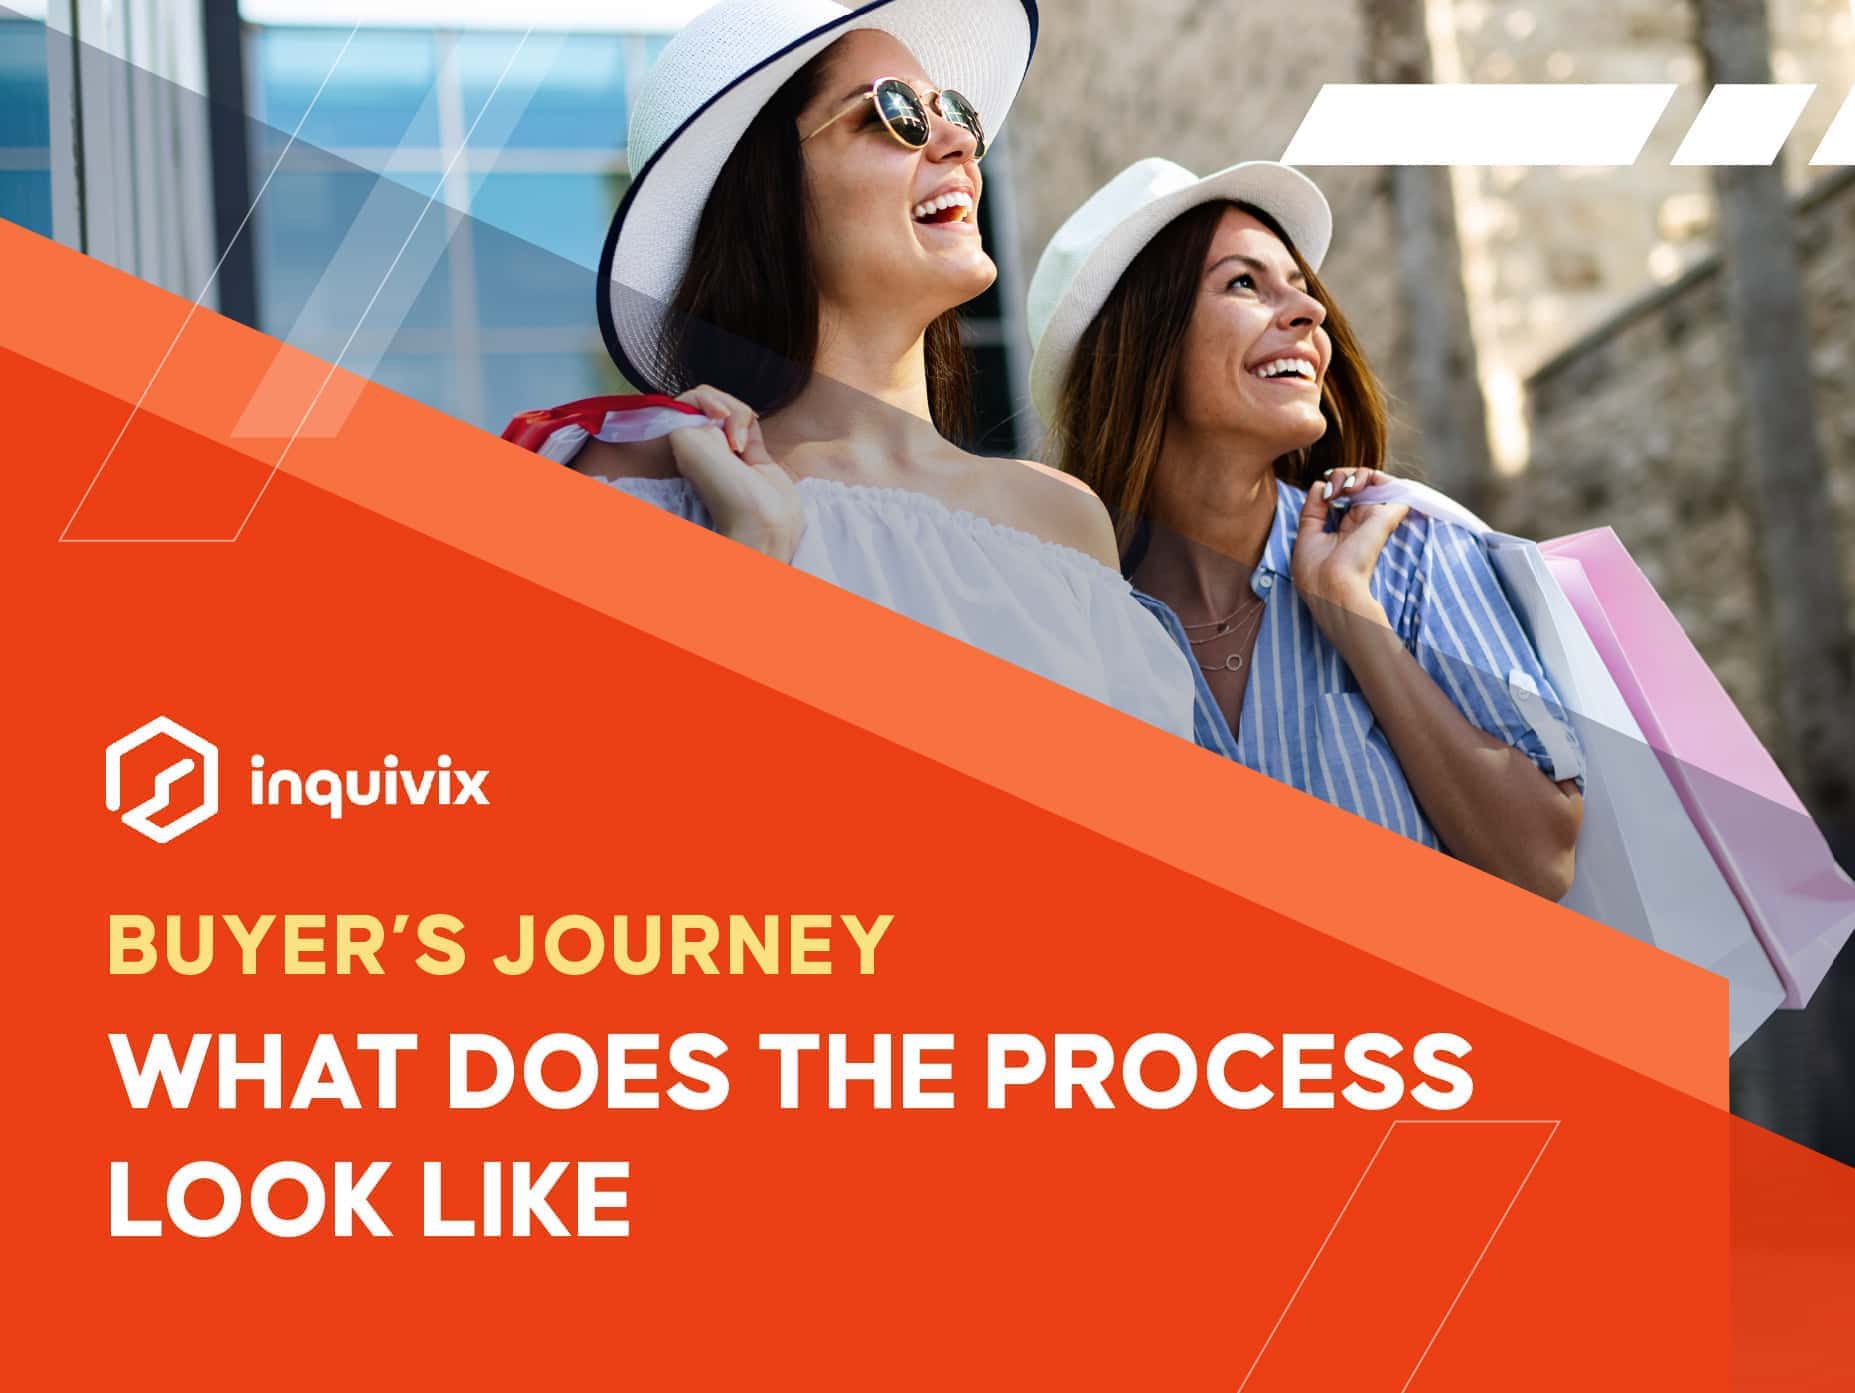 What The Process Of A Buyer's Journey Looks Like